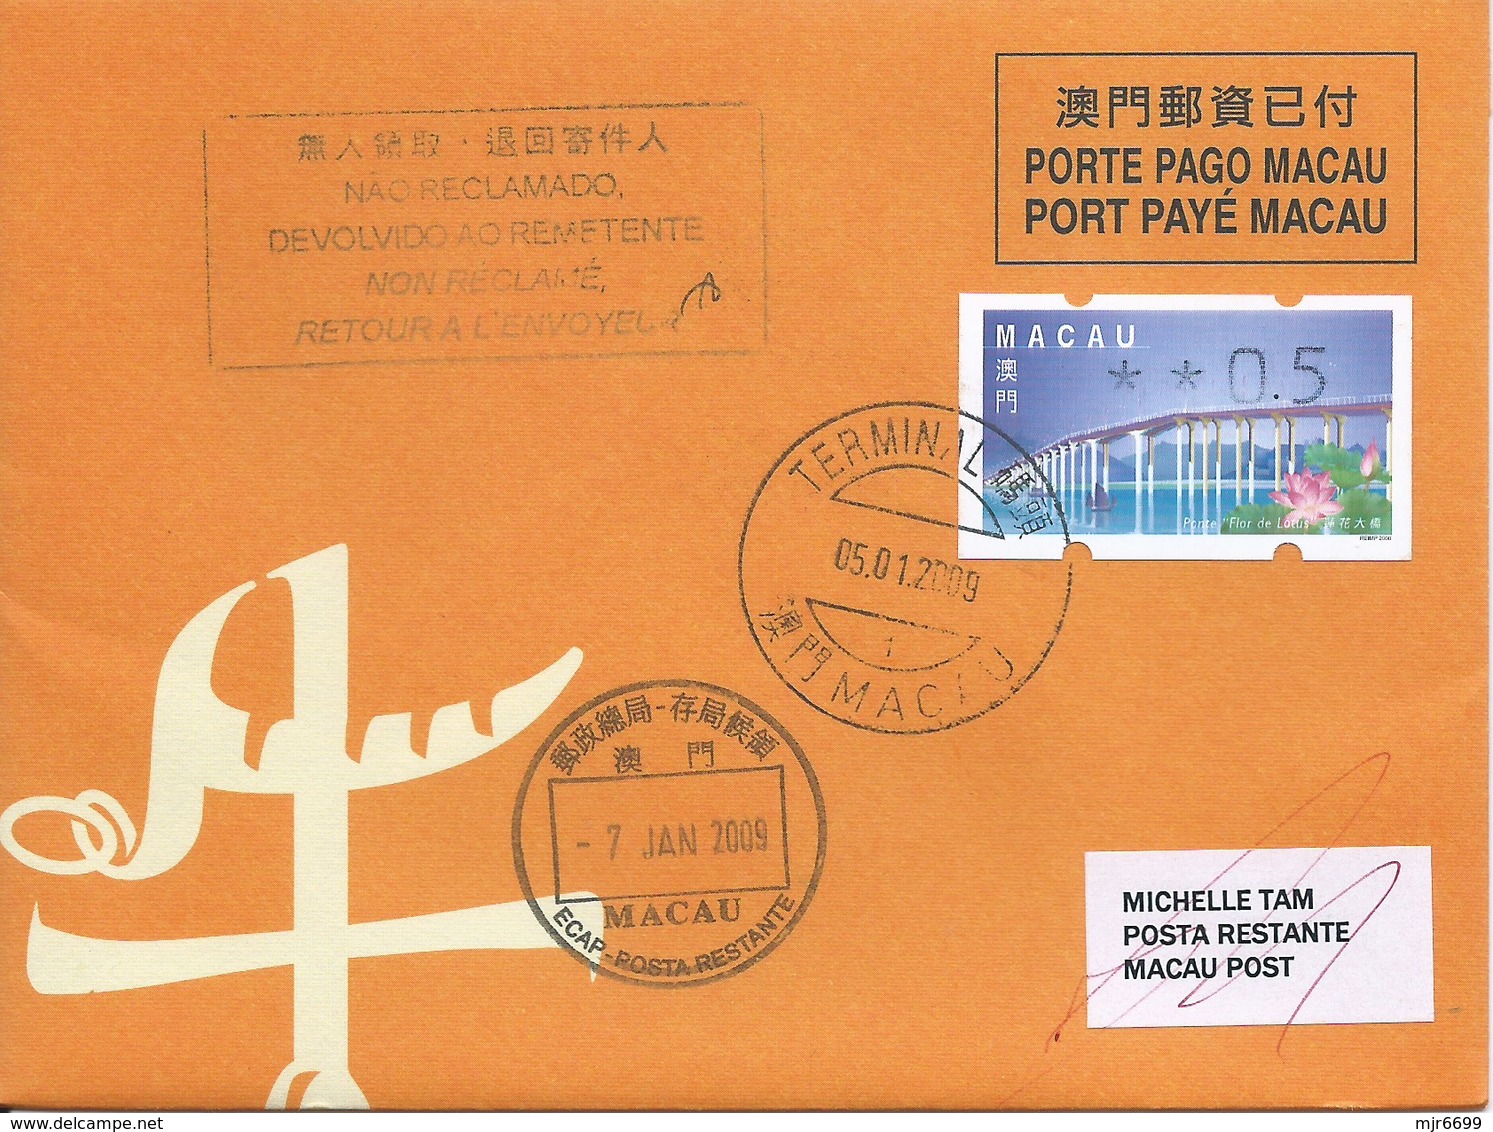 MACAU 2009 LUNAR YEAR OF THE OX GREETING CARD & POSTAGE PAID COVER FIRST DAY USAGE - Postal Stationery